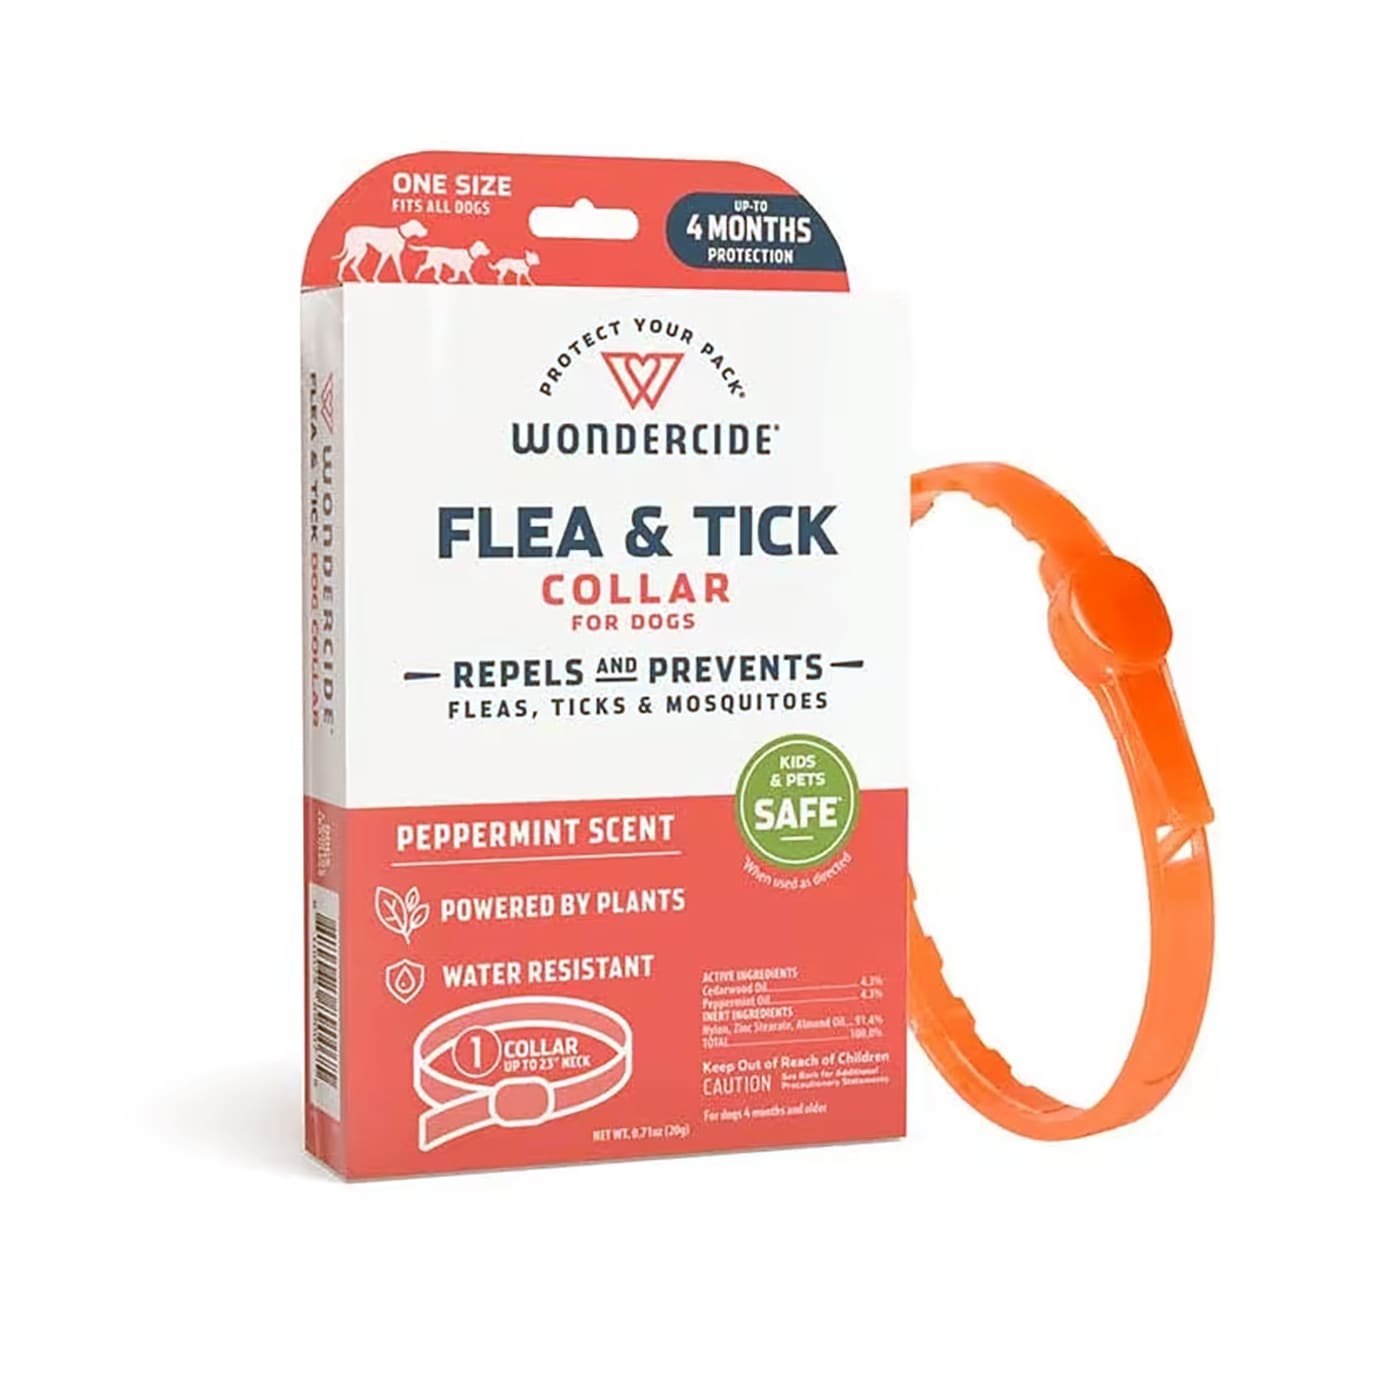 Wondercide Flea and Tick Collar for dogs